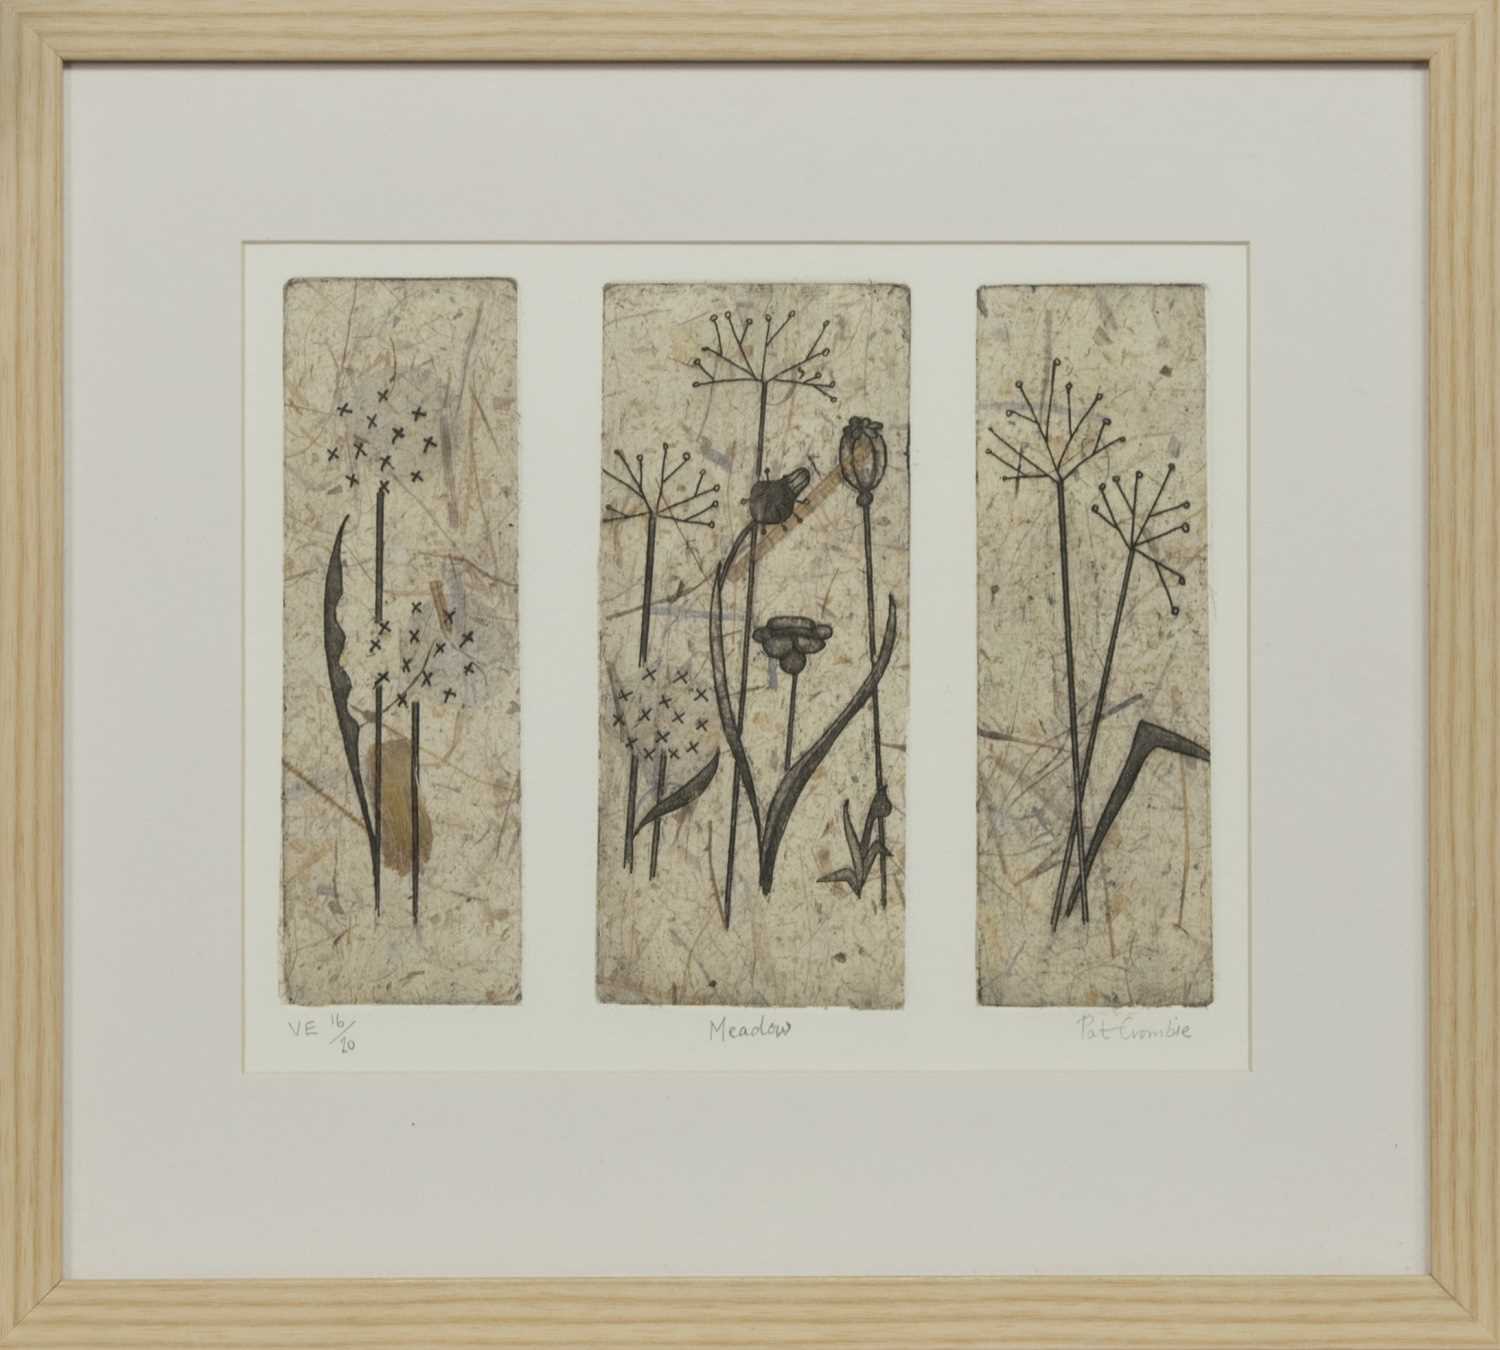 Lot 554 - MEADOW, AN ETCHING BY PAT CROMBIE